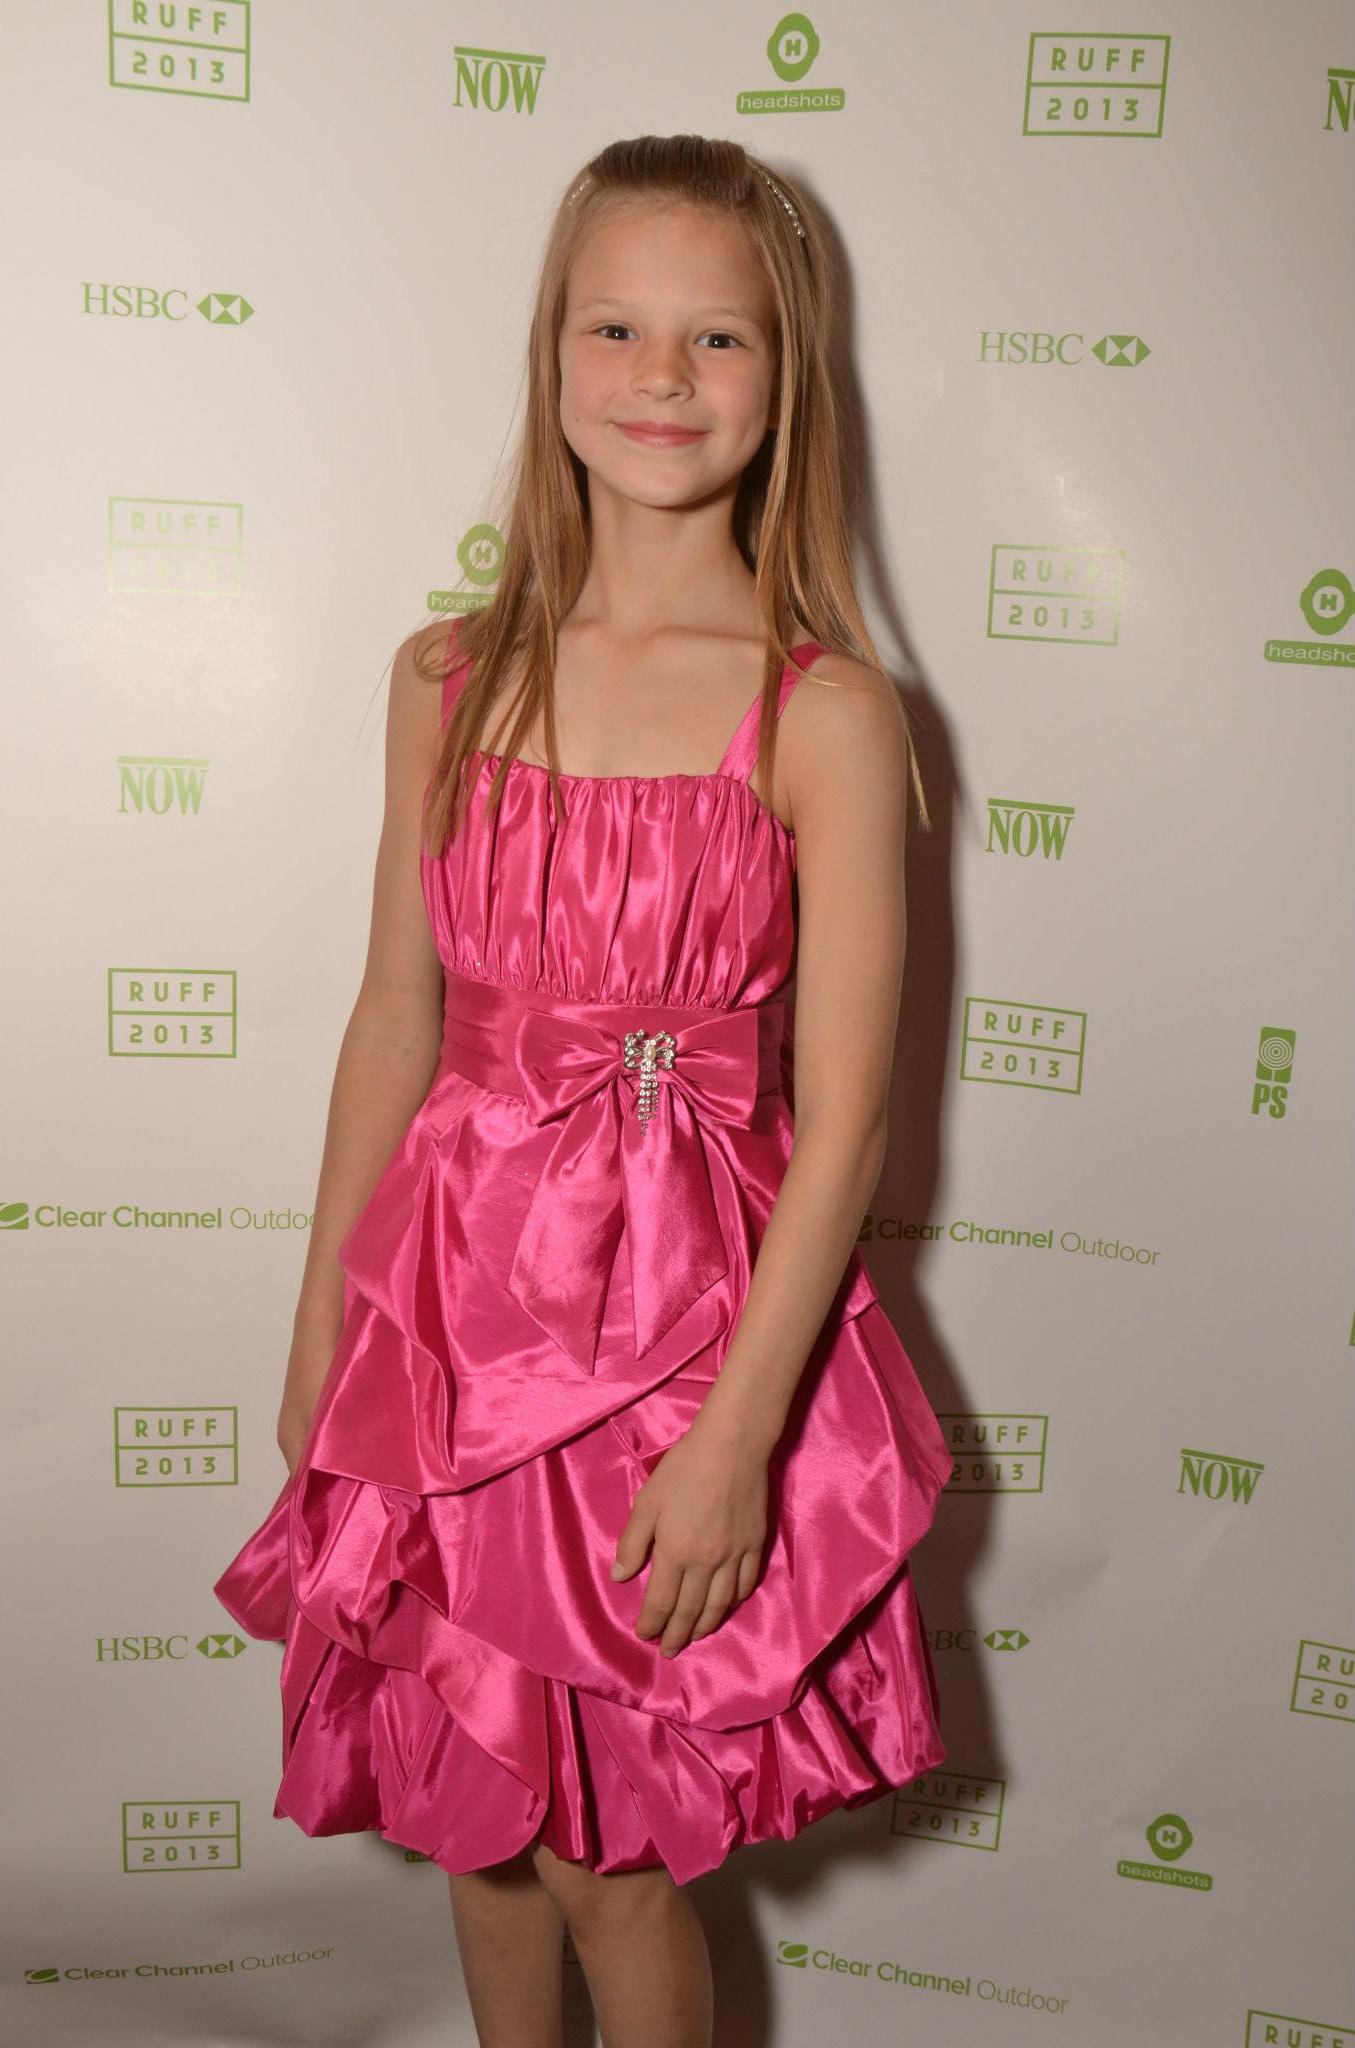 Peyton Kennedy at the premiere of To Look Away at the 2013 Ryerson University Film Festival (RUFF)